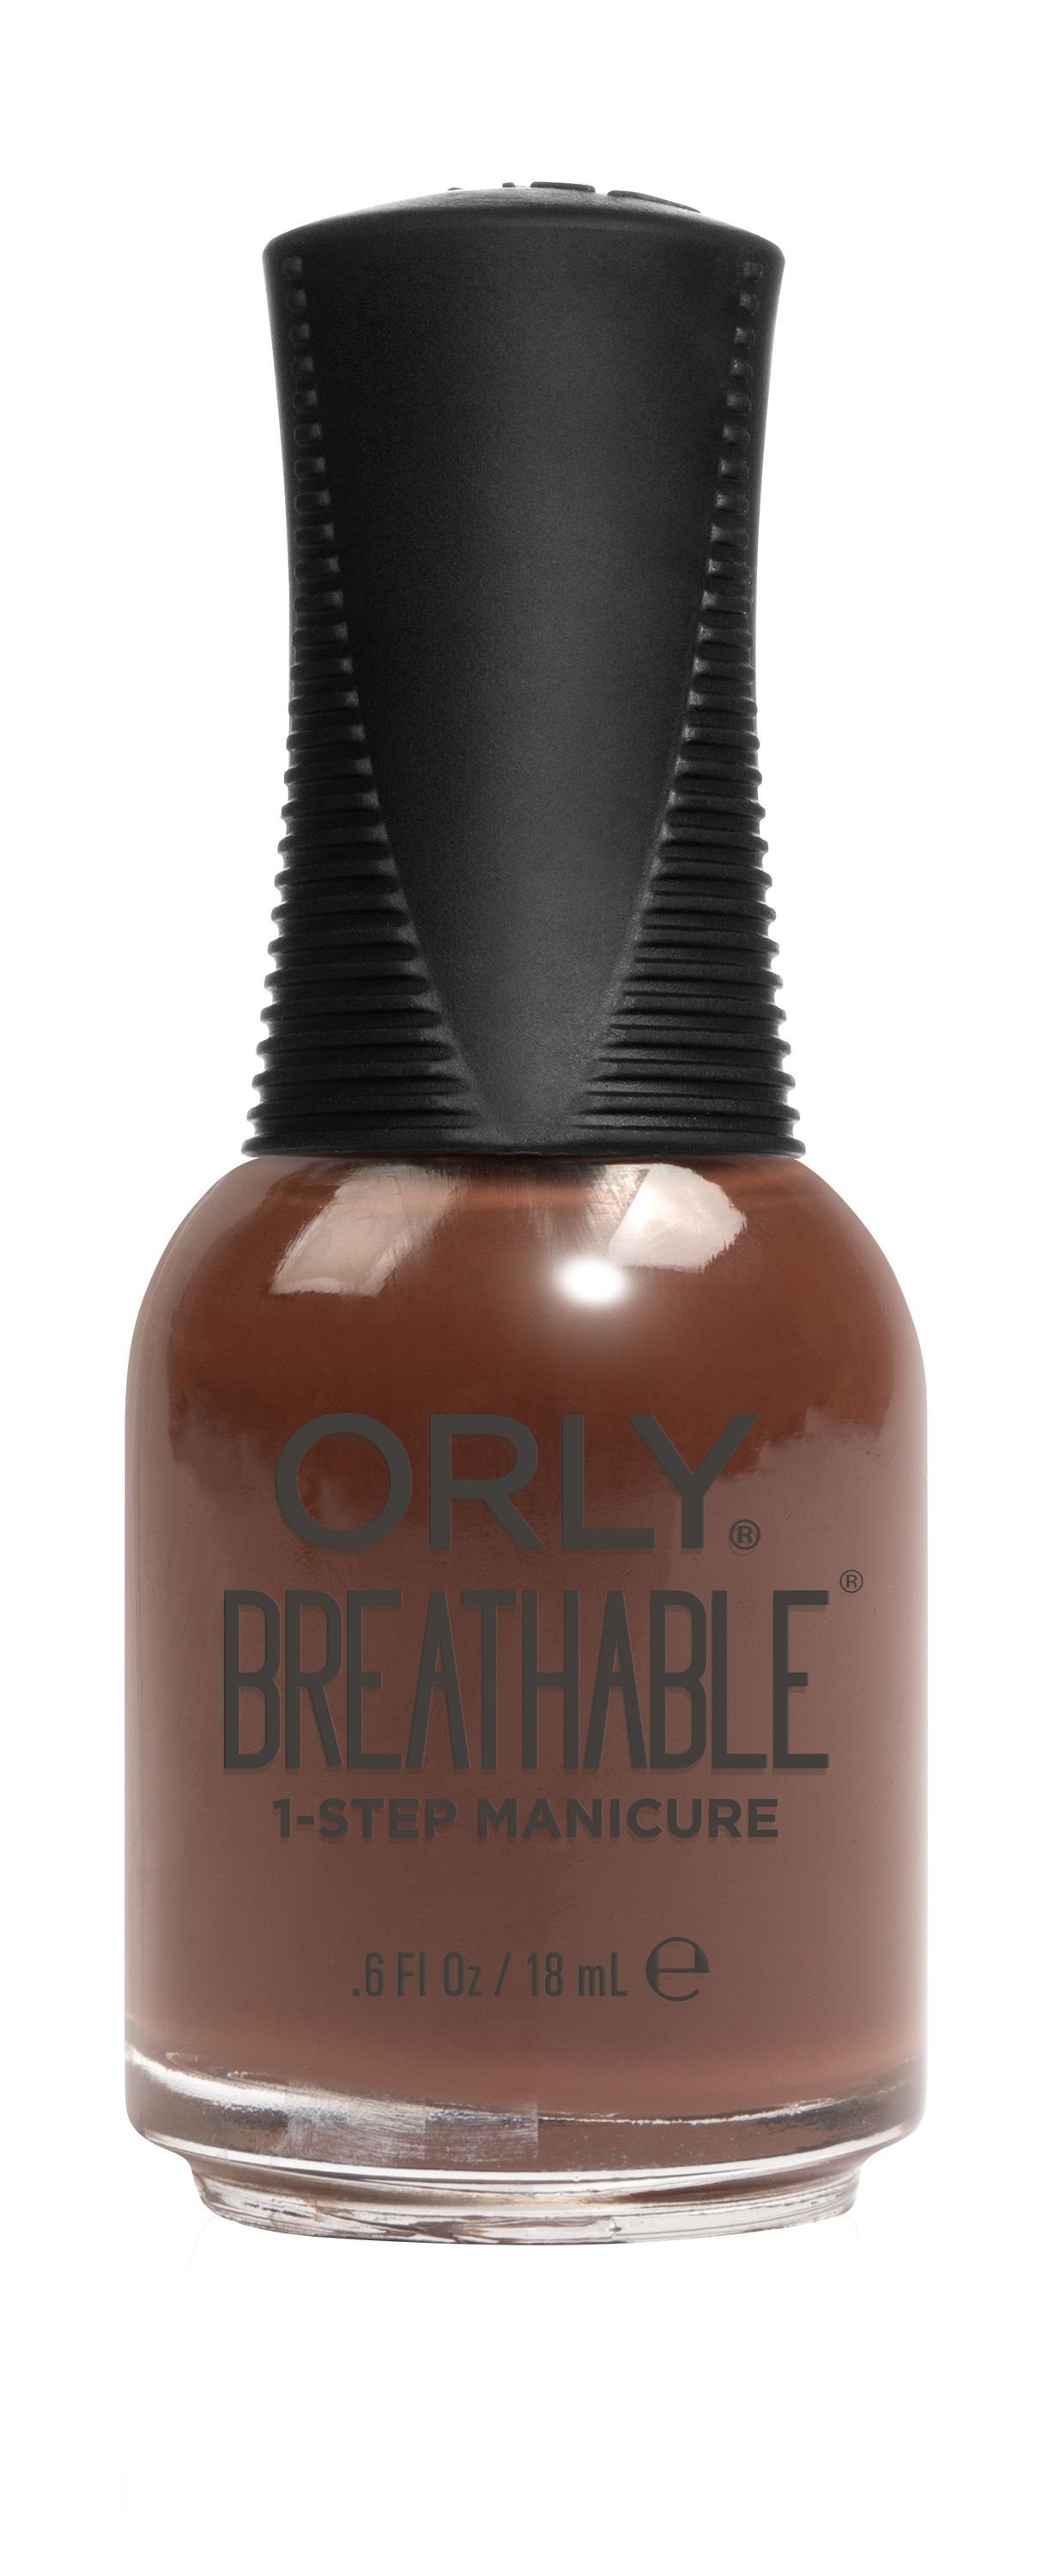 ORLY Nagellack ORLY Breathable Rich Umber, 18 ML